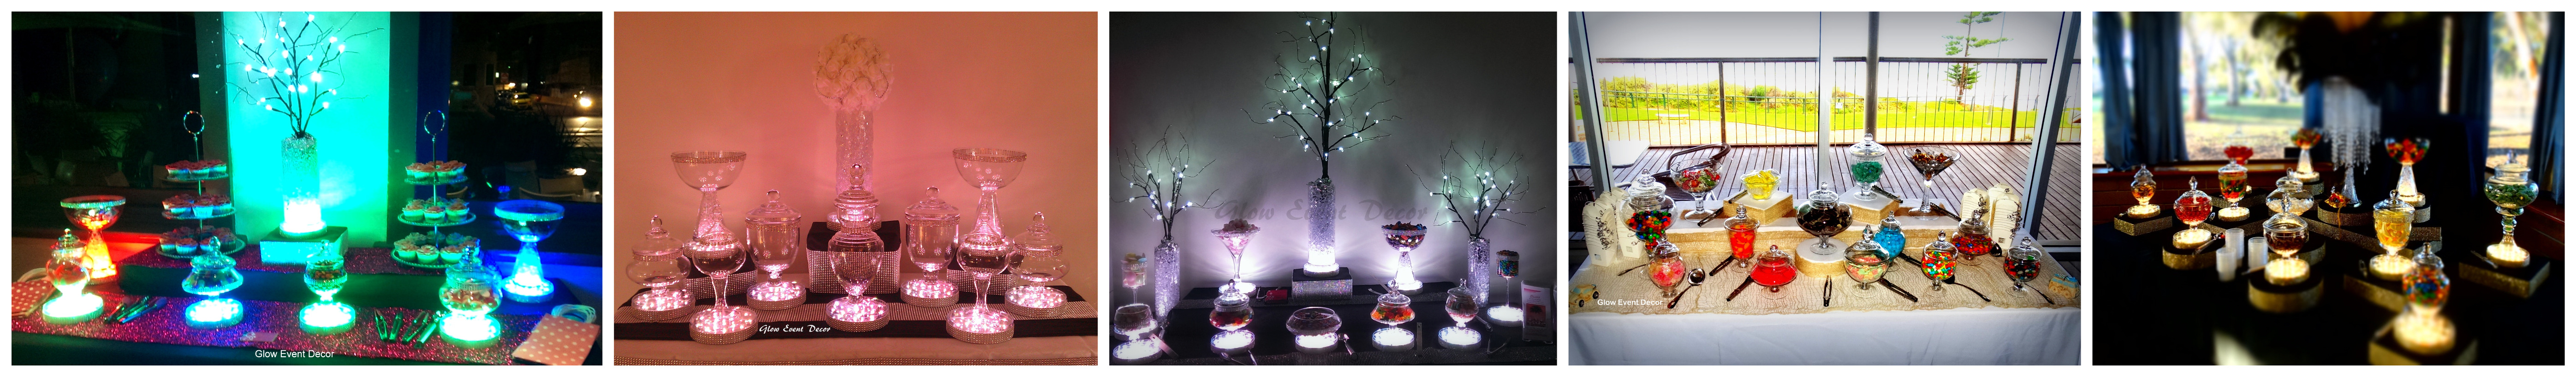 LED lolly candy buffet light up candy lolly jars,  hire from glow event decor in Adelaide.